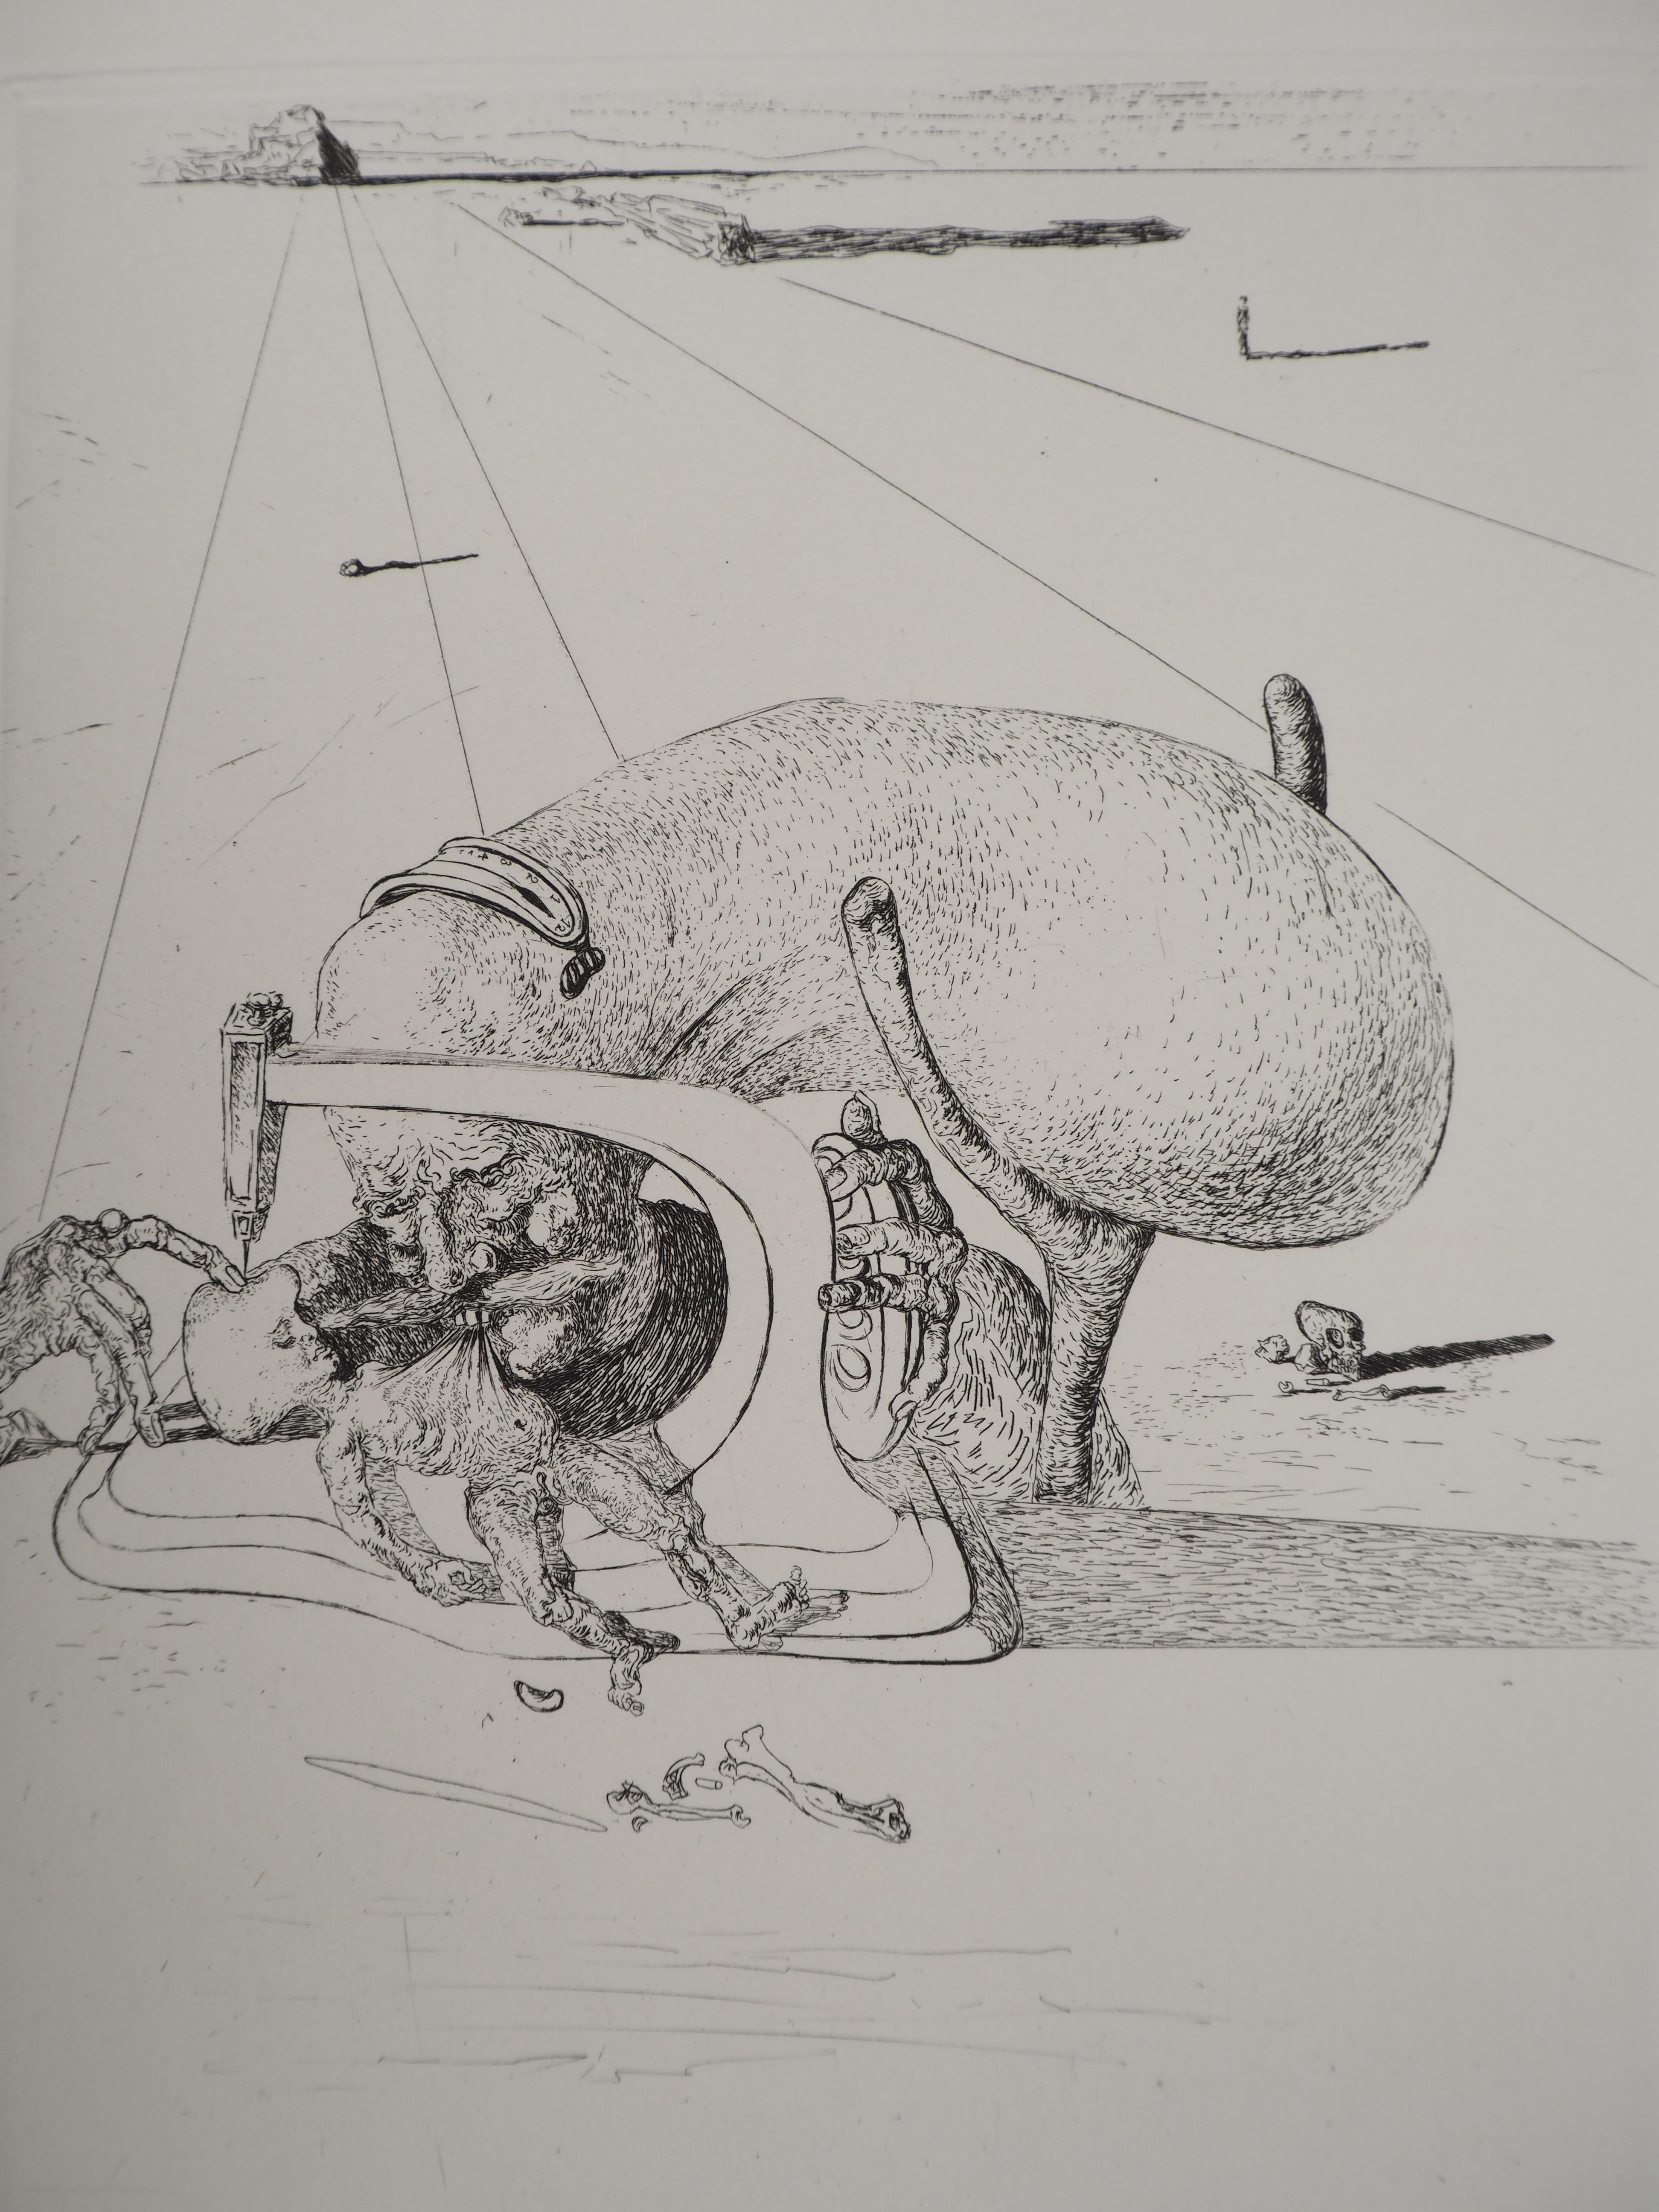 Salvador Dali
Allegory of time and aging, 1975

Original etching 
Signed in pencil 
Limited to 100 copies (Here numbered 52)
On Arches vellum  32.5 x 25 cm (c. 12.7 x 9.8 in)

REFERENCES :
- Catalog raisonne Field #34-2
- Catalog raisonne Michler &